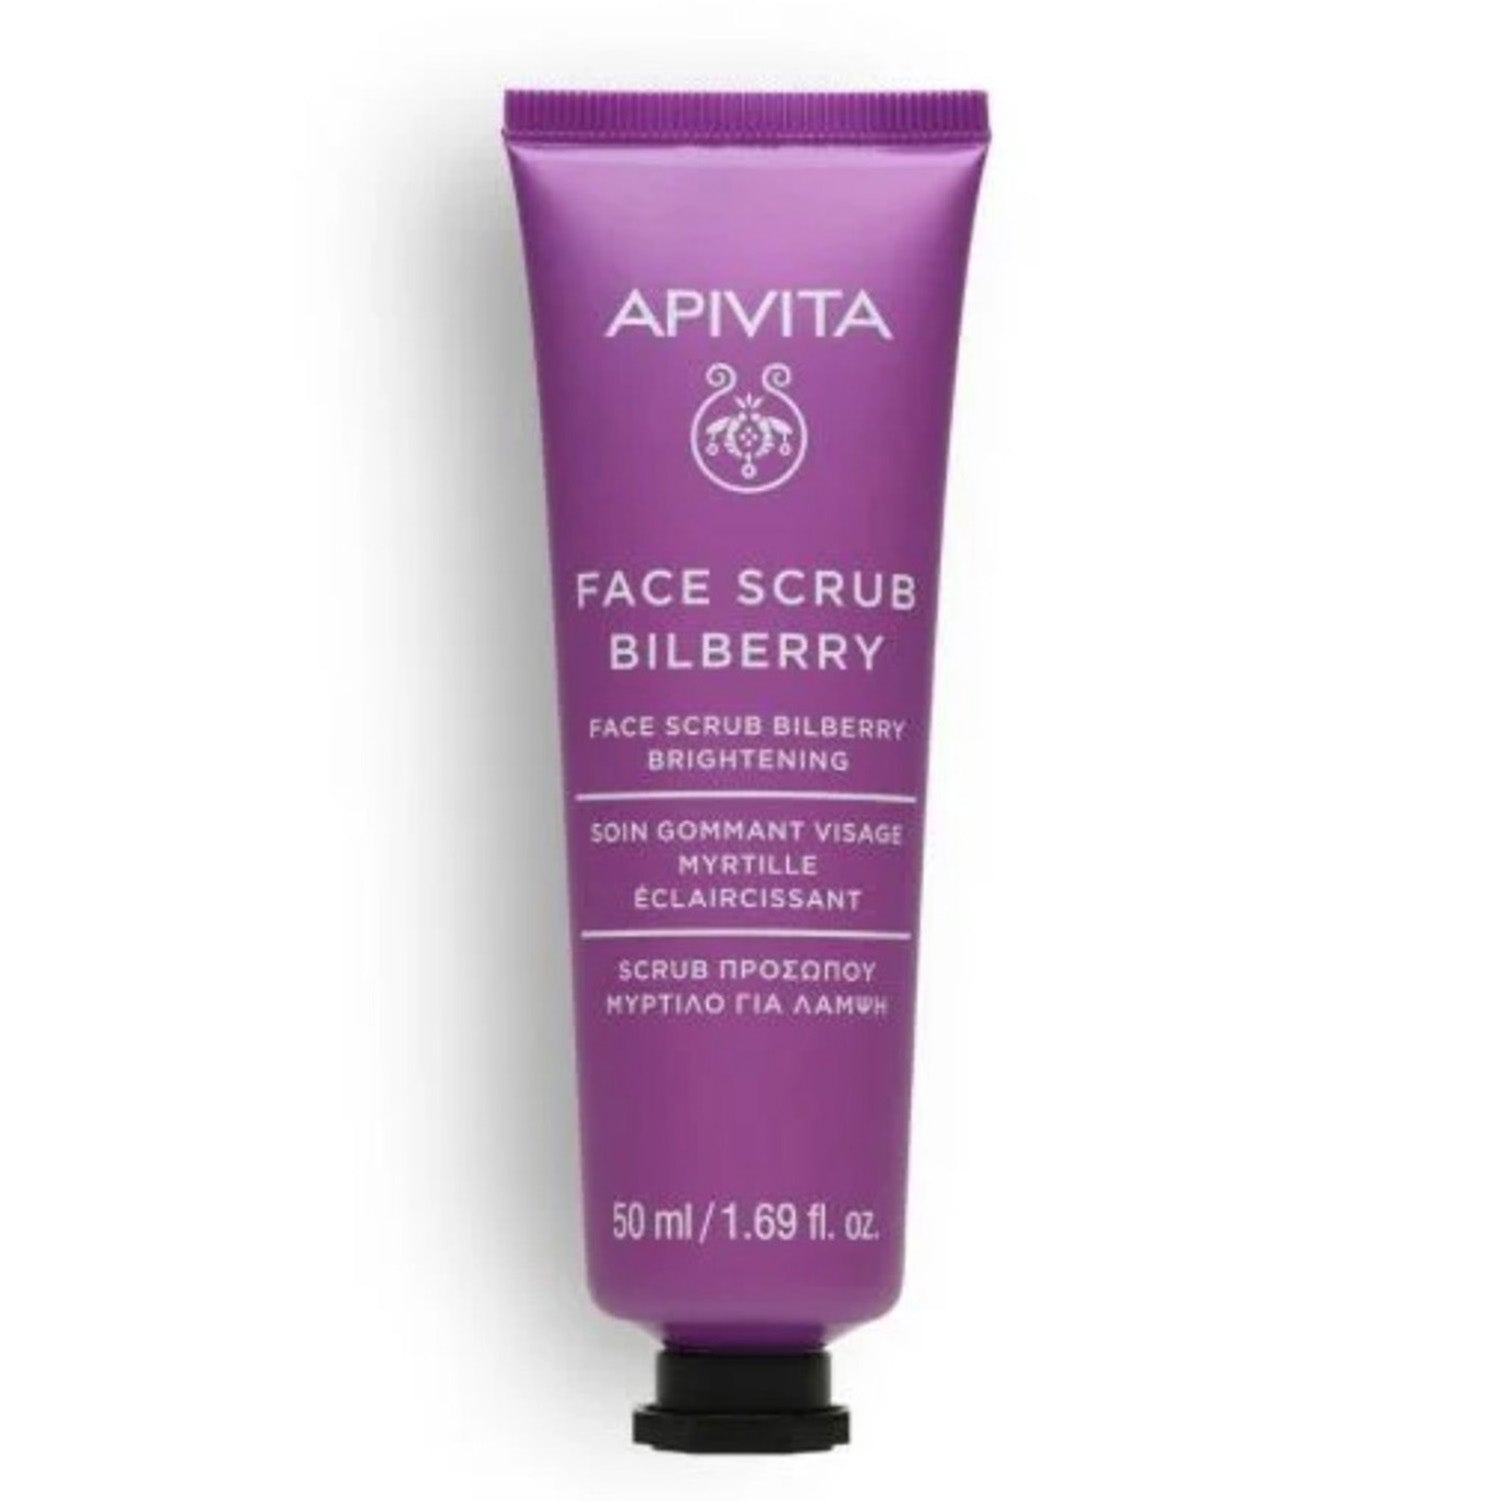 Apivita Face Scrub with Bilberry contains bilberry, a superfood with powerful antioxidant benefits, to help provide skin with a radiant appearance and create a more uniform complexion.